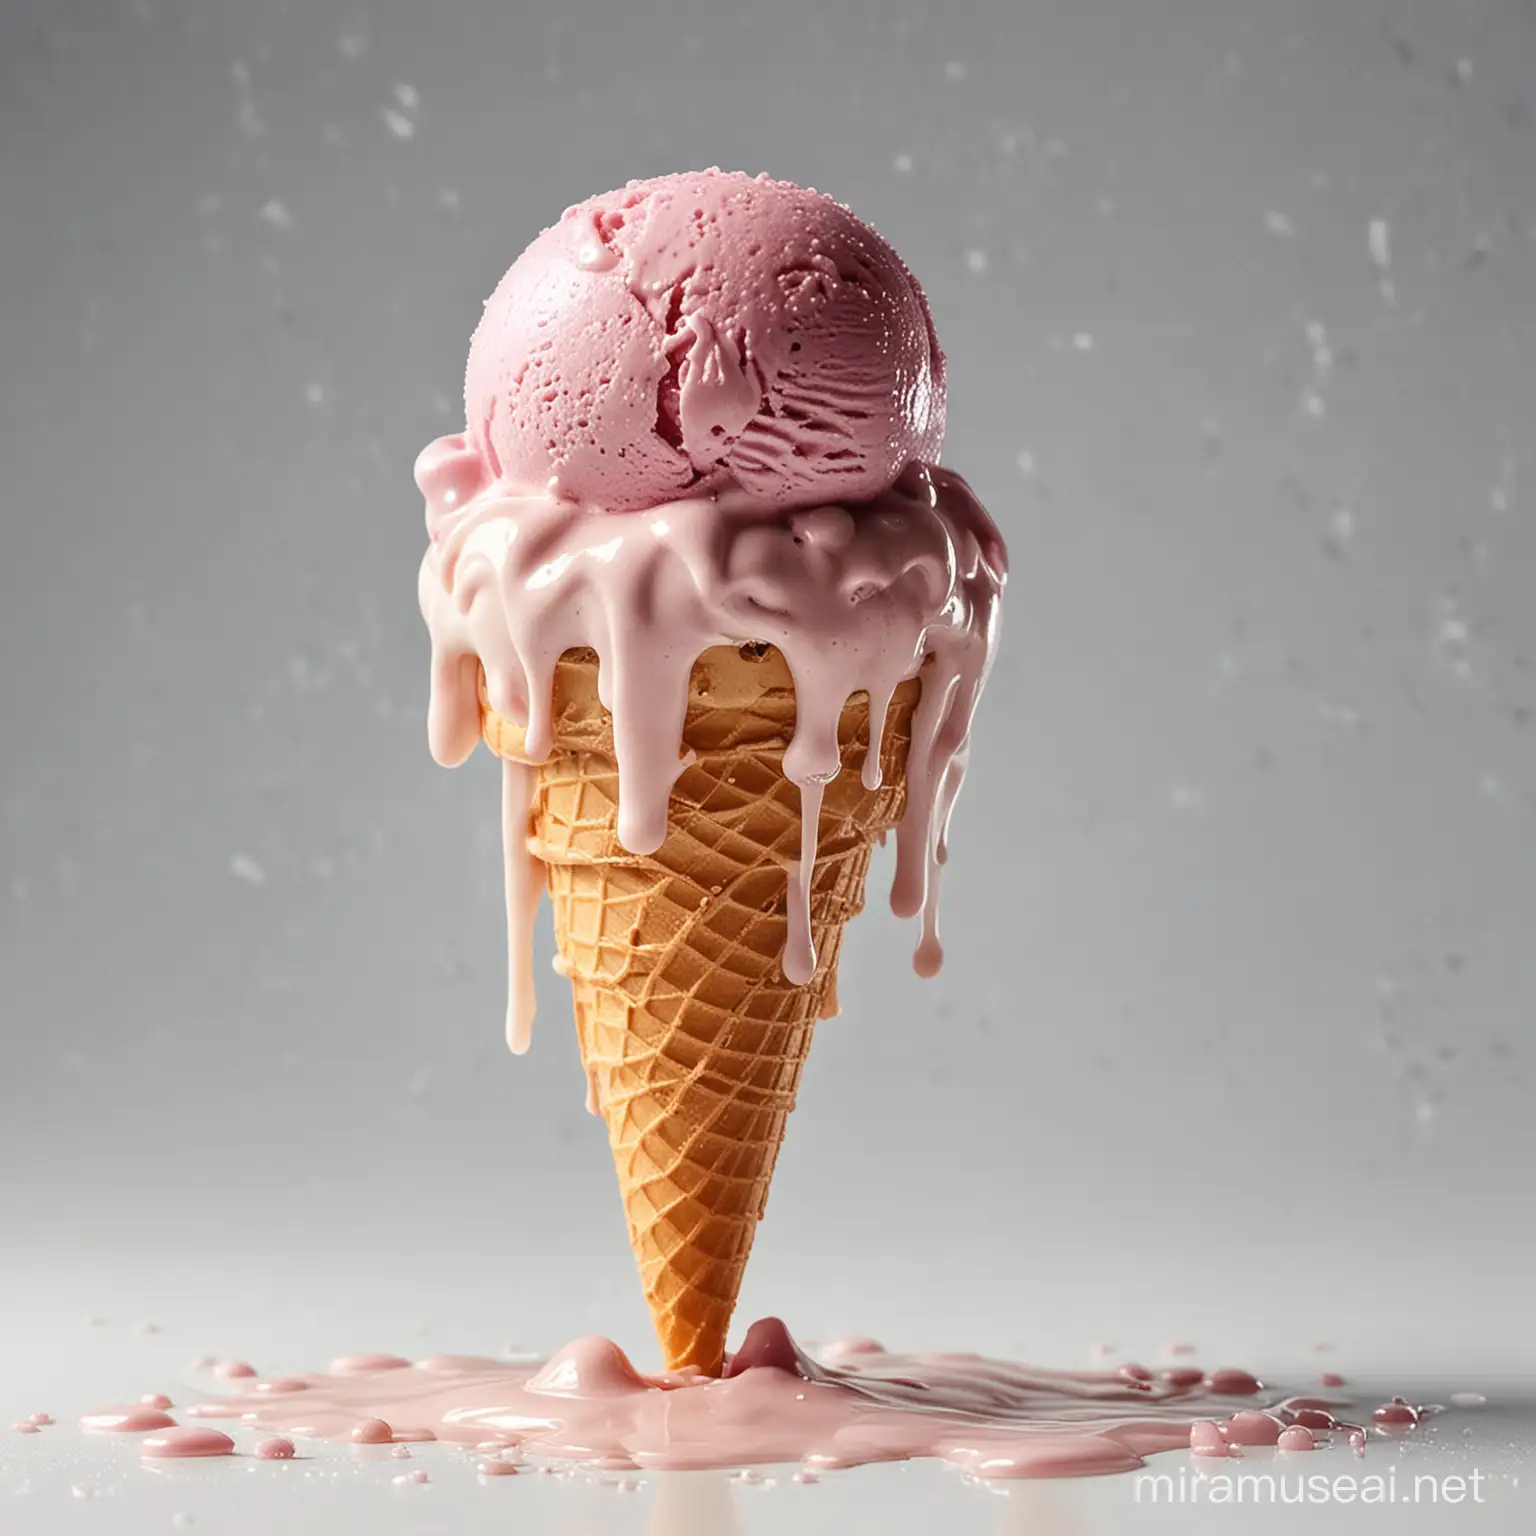 give me a picture of a melting ice cream